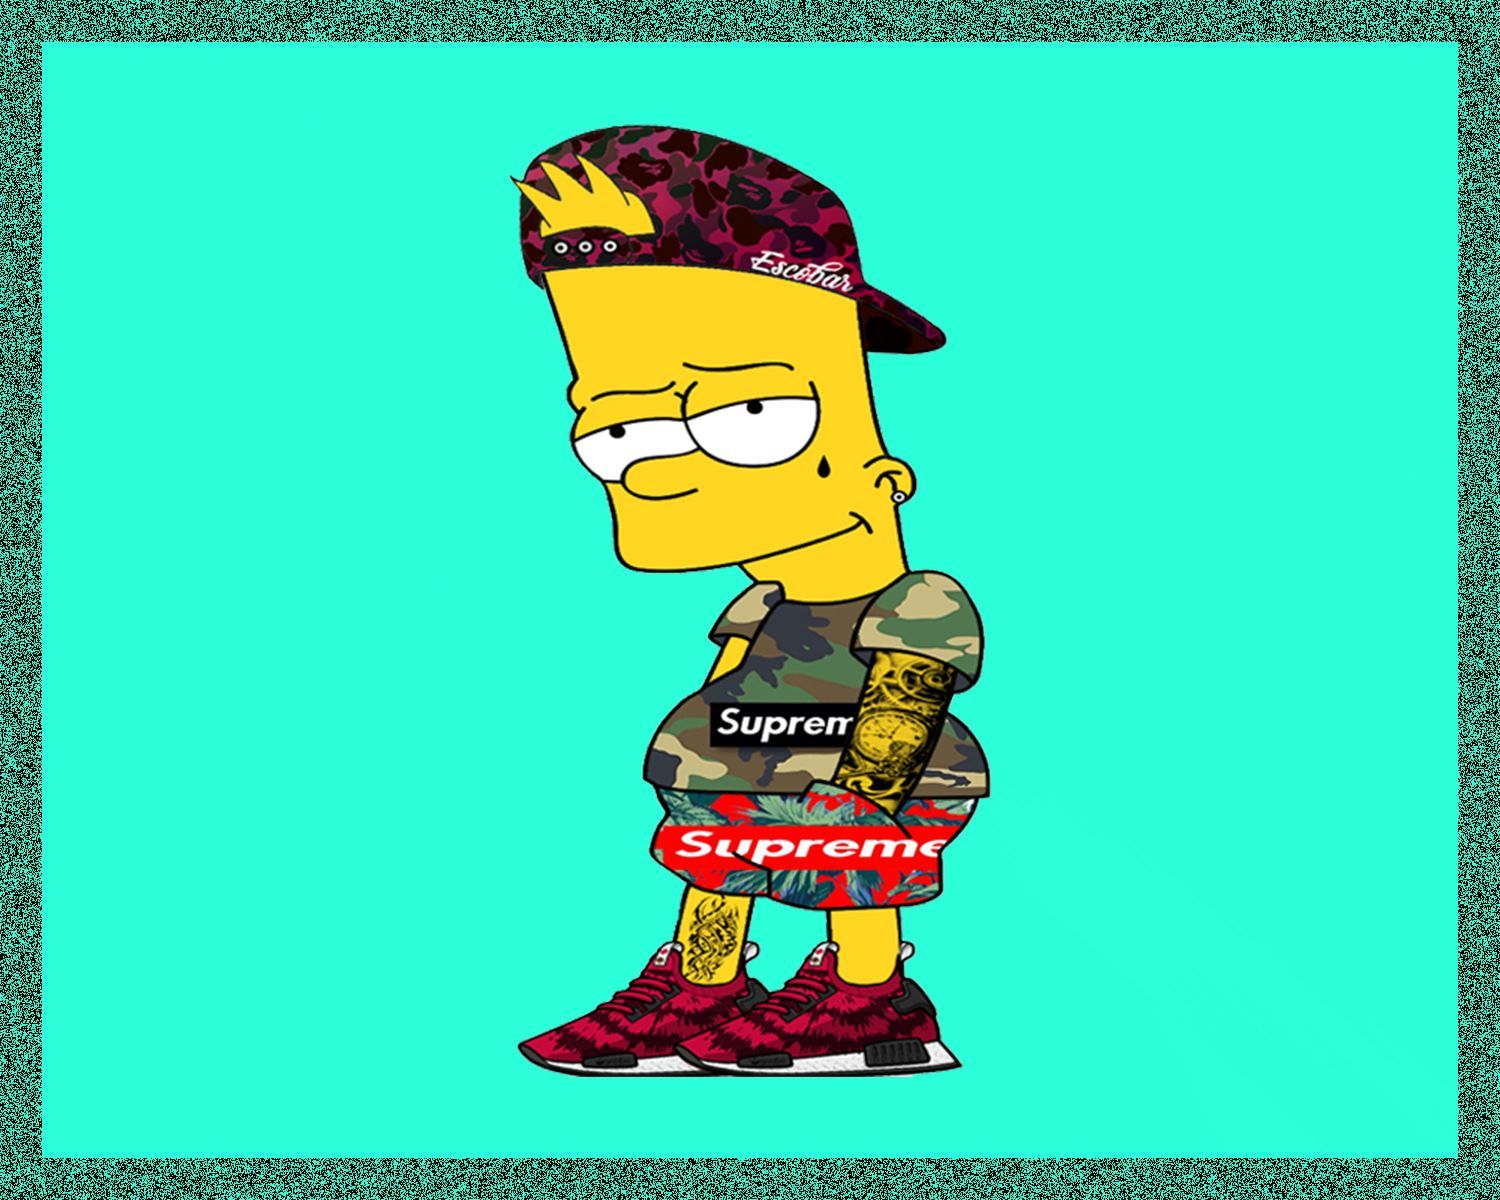 Brand Simpson Wallpapers